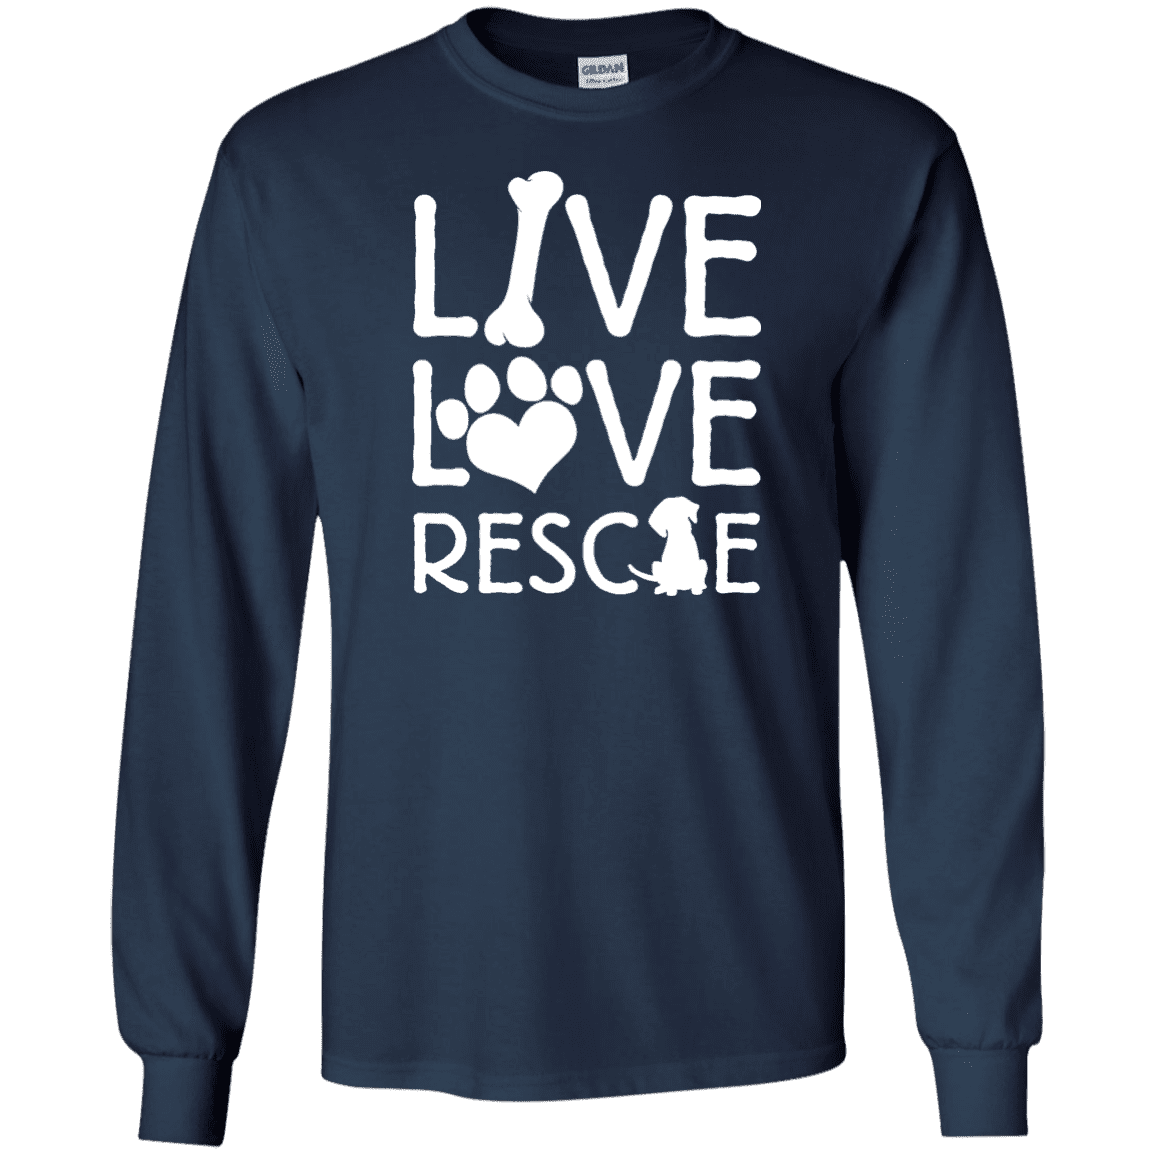 Live Love Rescue - Long Sleeve.